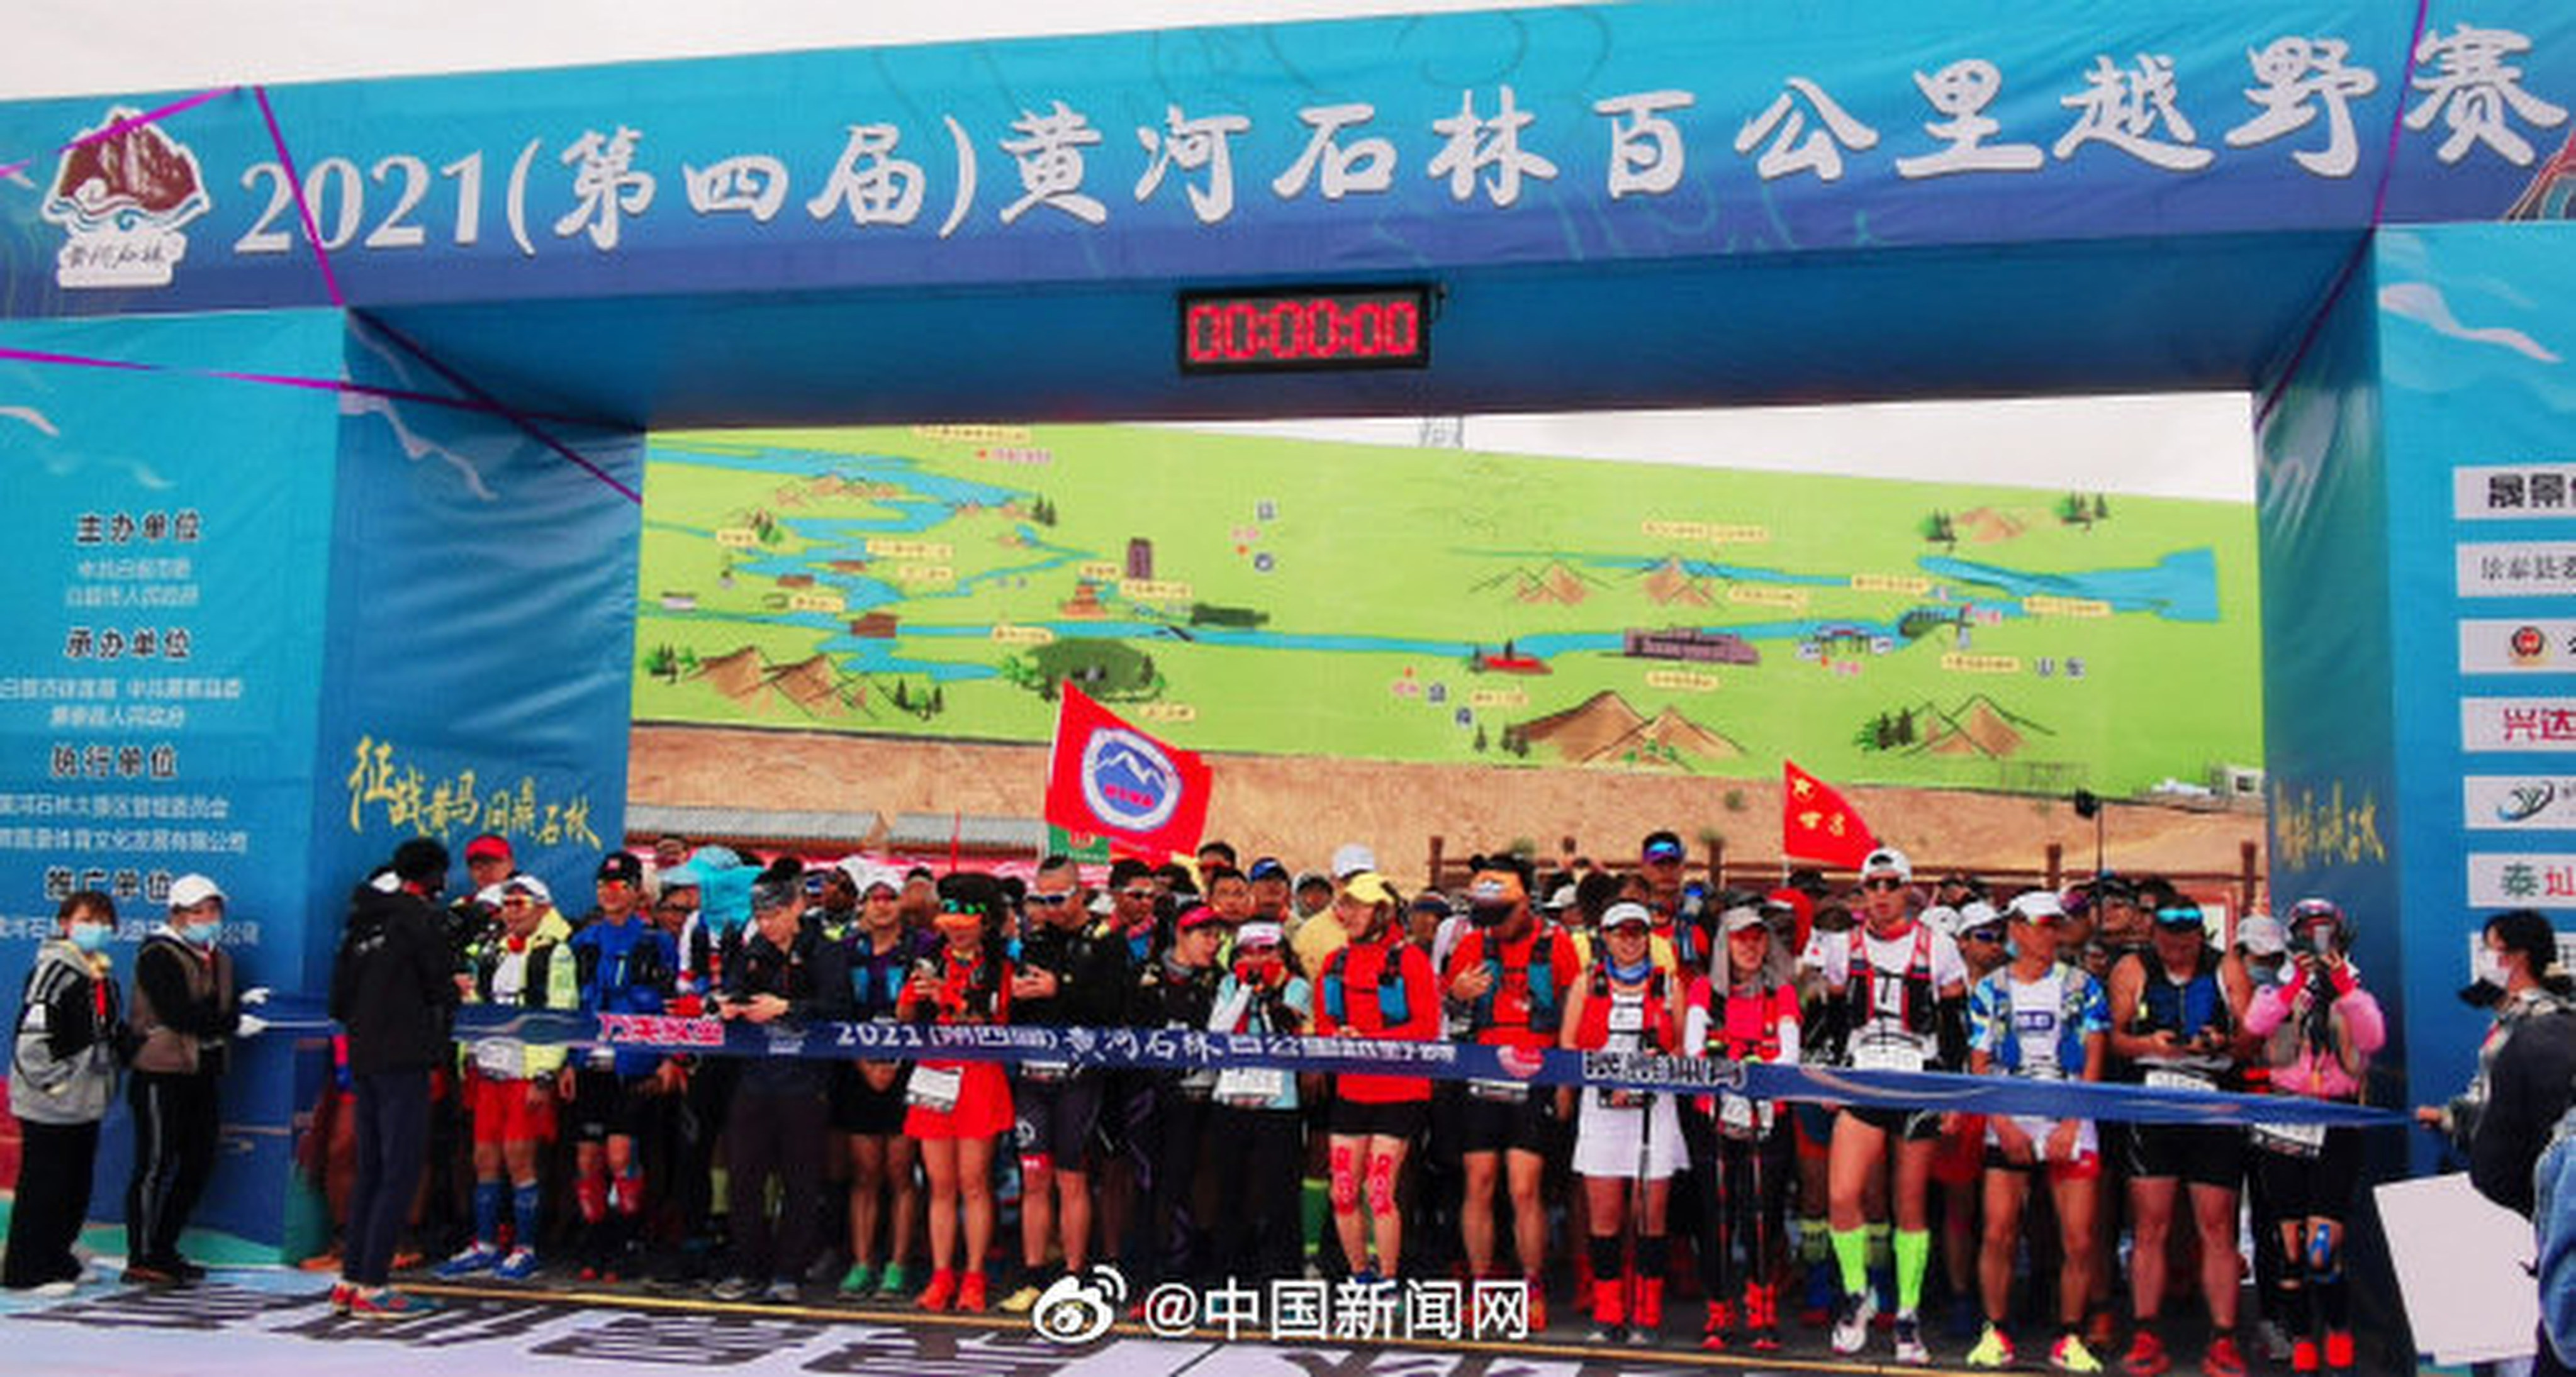 The cross-country endurance event took place at Yellow River Stone Forest, a national park in Gansu province, China, on May 22, 2021. Photo: Weibo